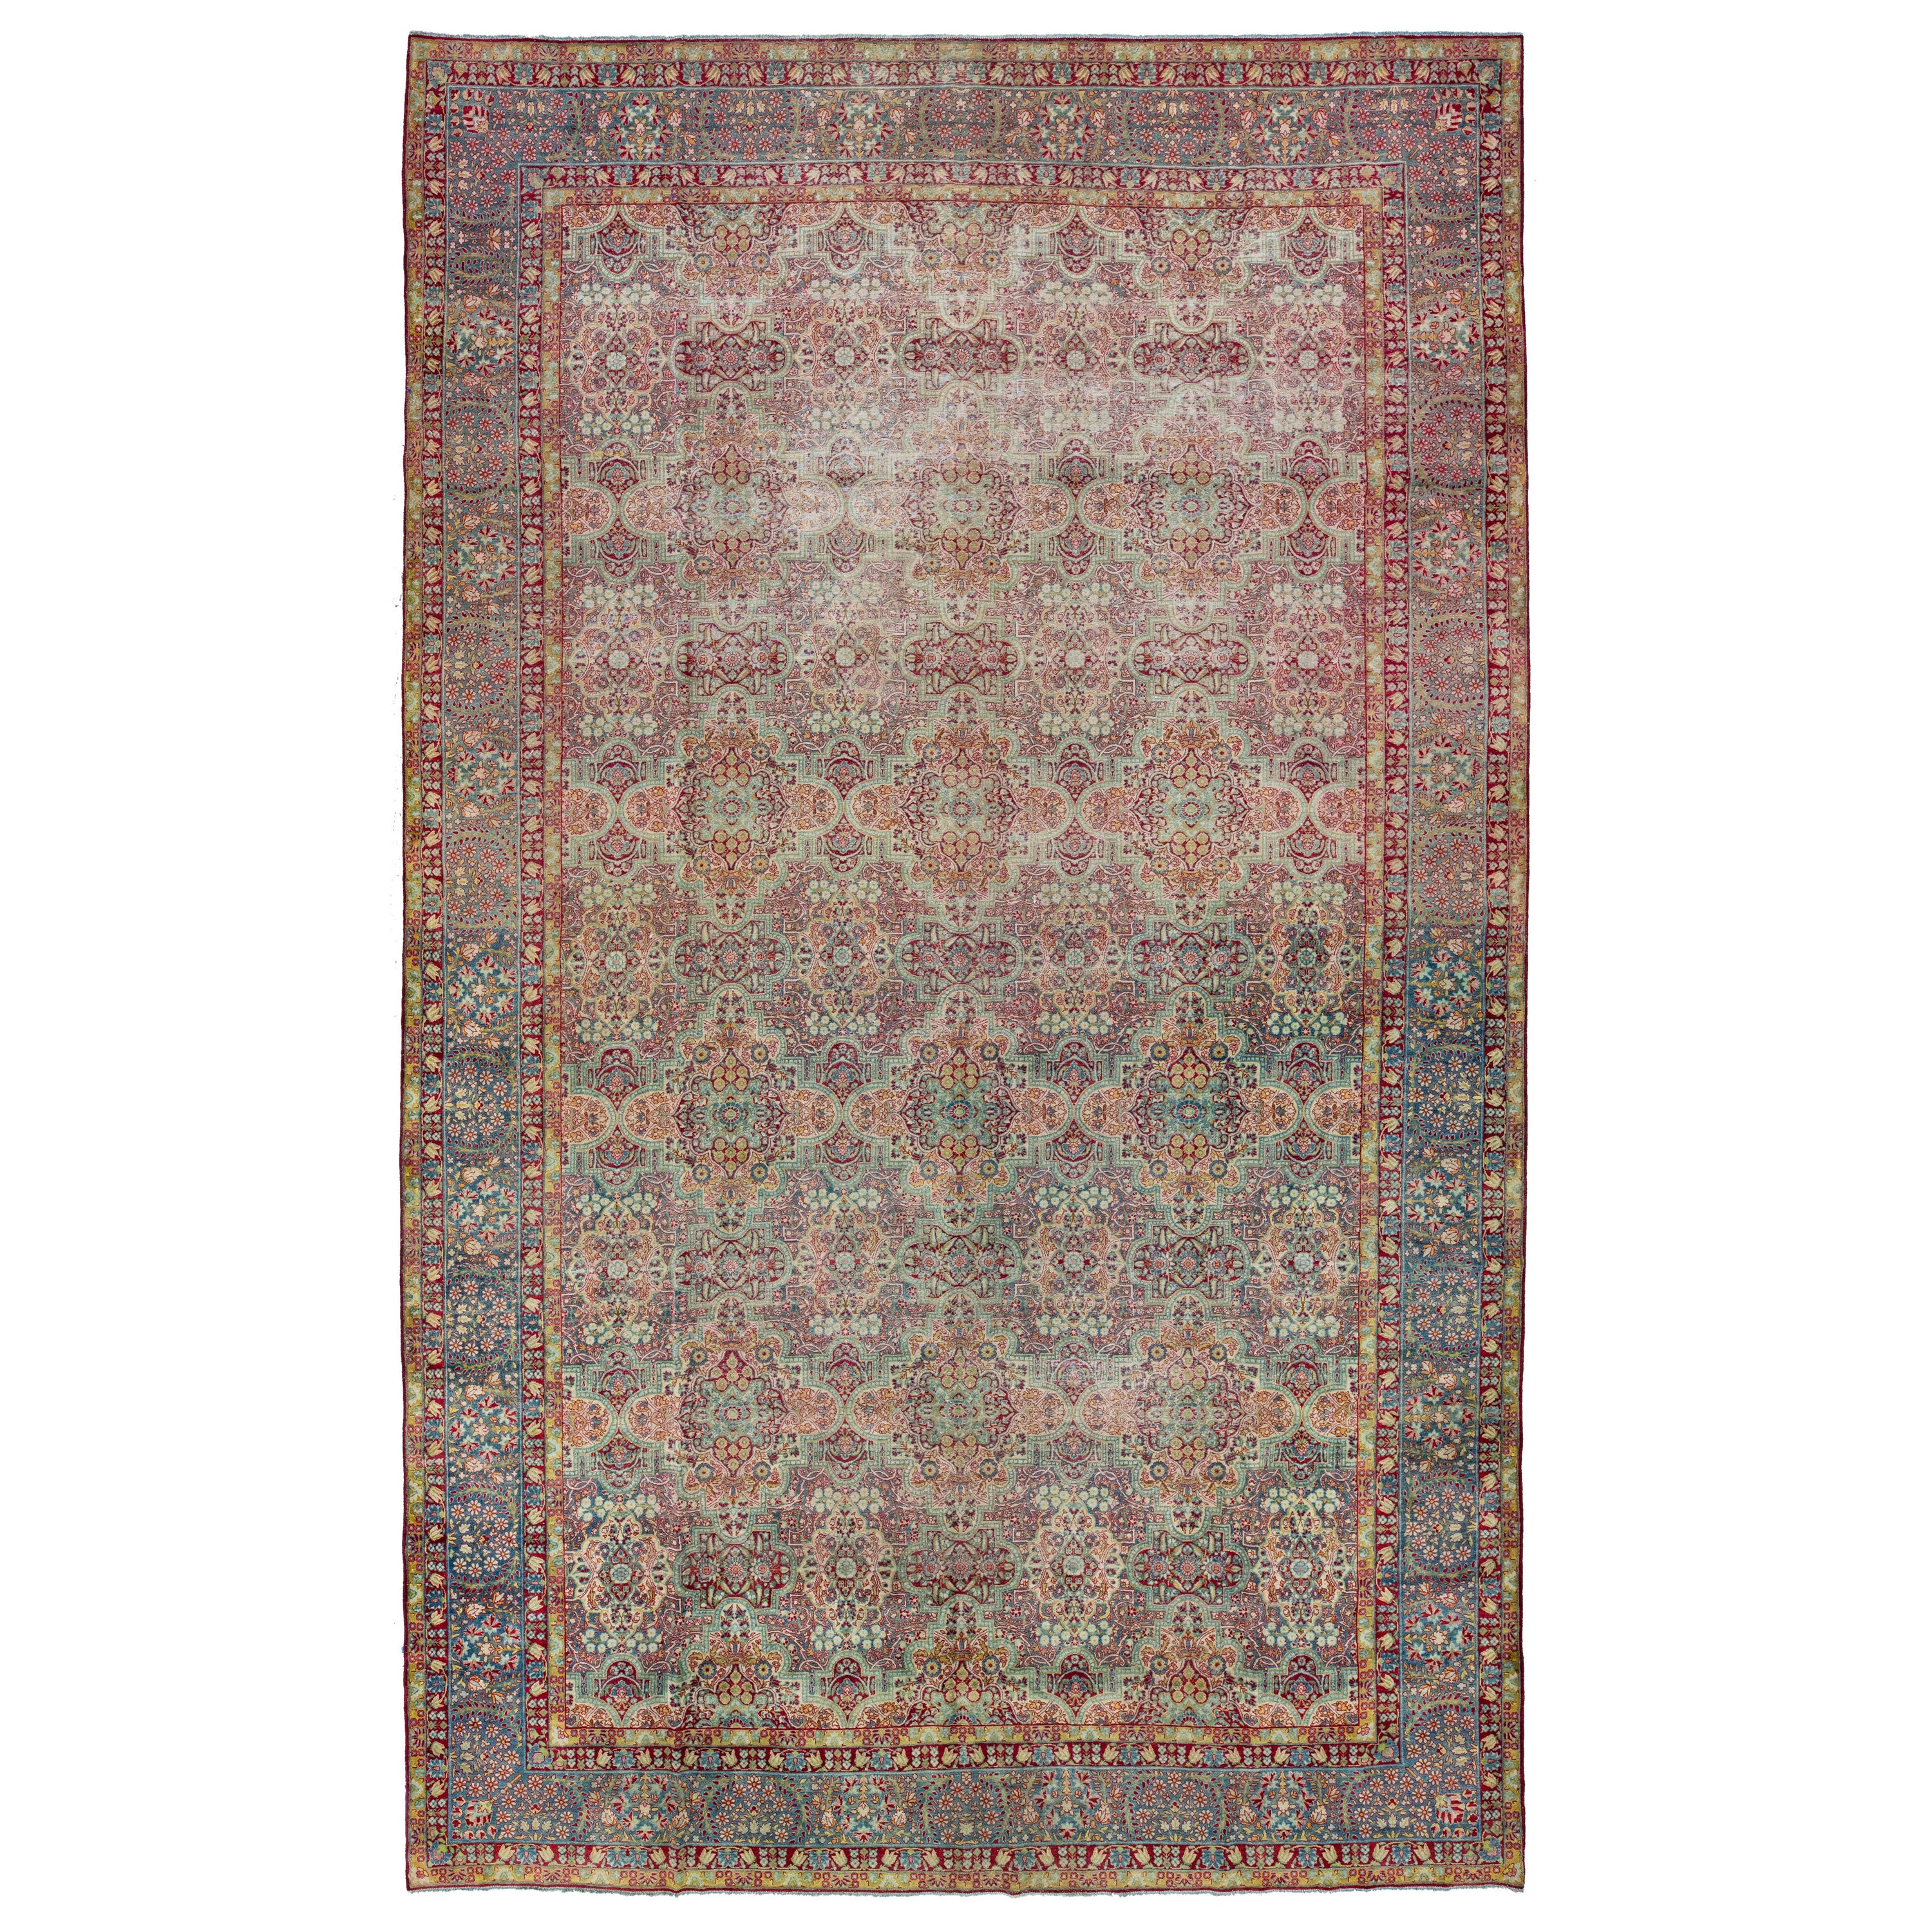 Blue Persian Tabriz Antique Wool Rug with Allover Floral Motif from the 1900's For Sale